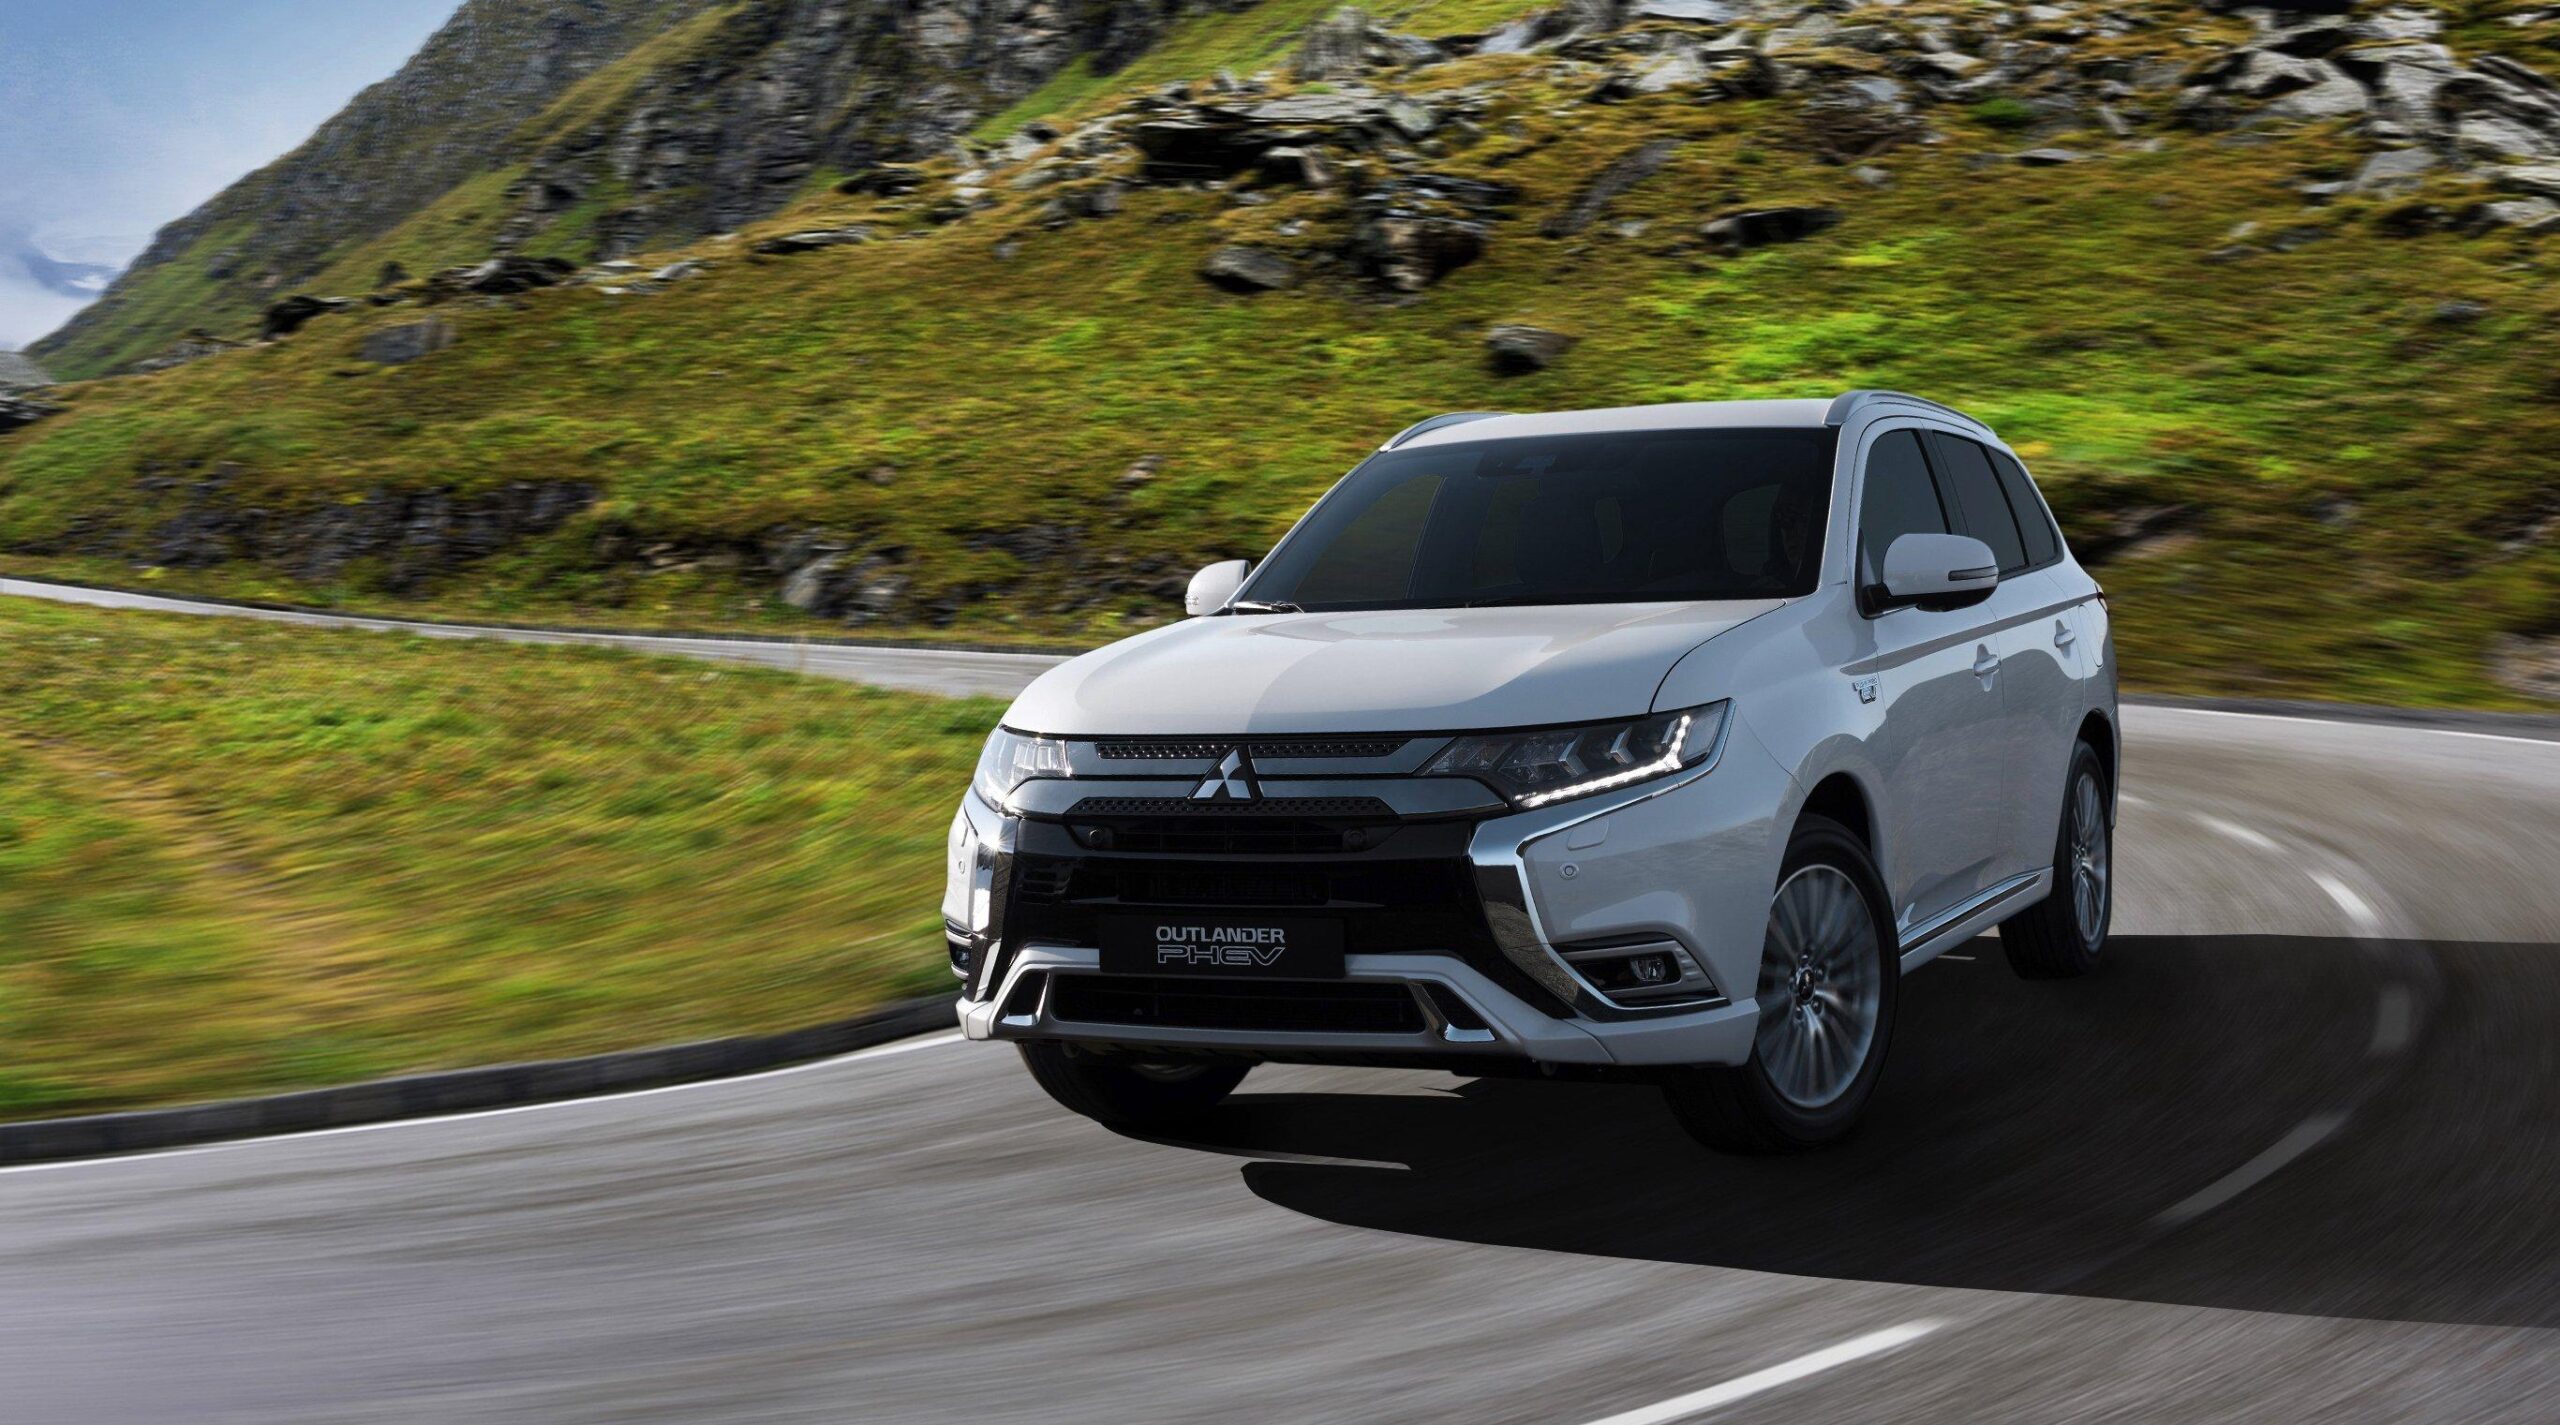 Mitsubishi Outlander PHEV Pictures, Photos, Wallpapers